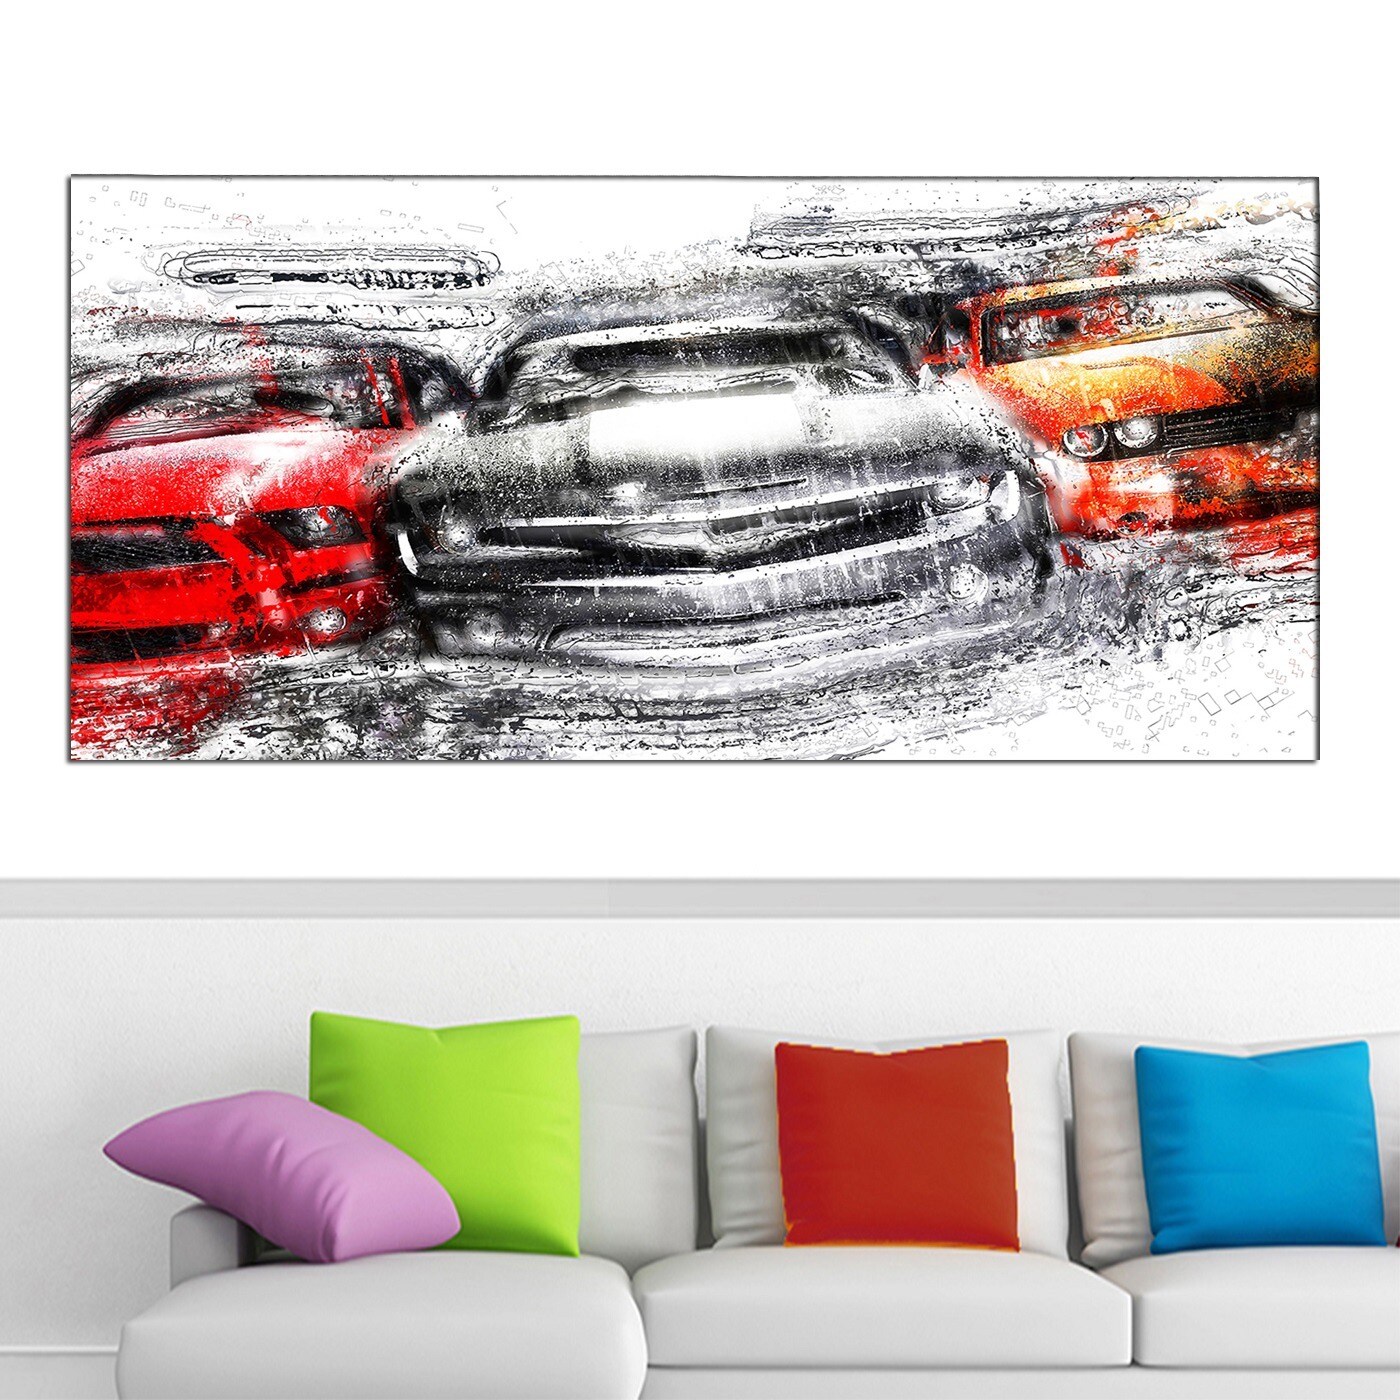 D4060 The American road 21,000,000 passenger cars Gallery Wrapped Canvas Wall Art Print